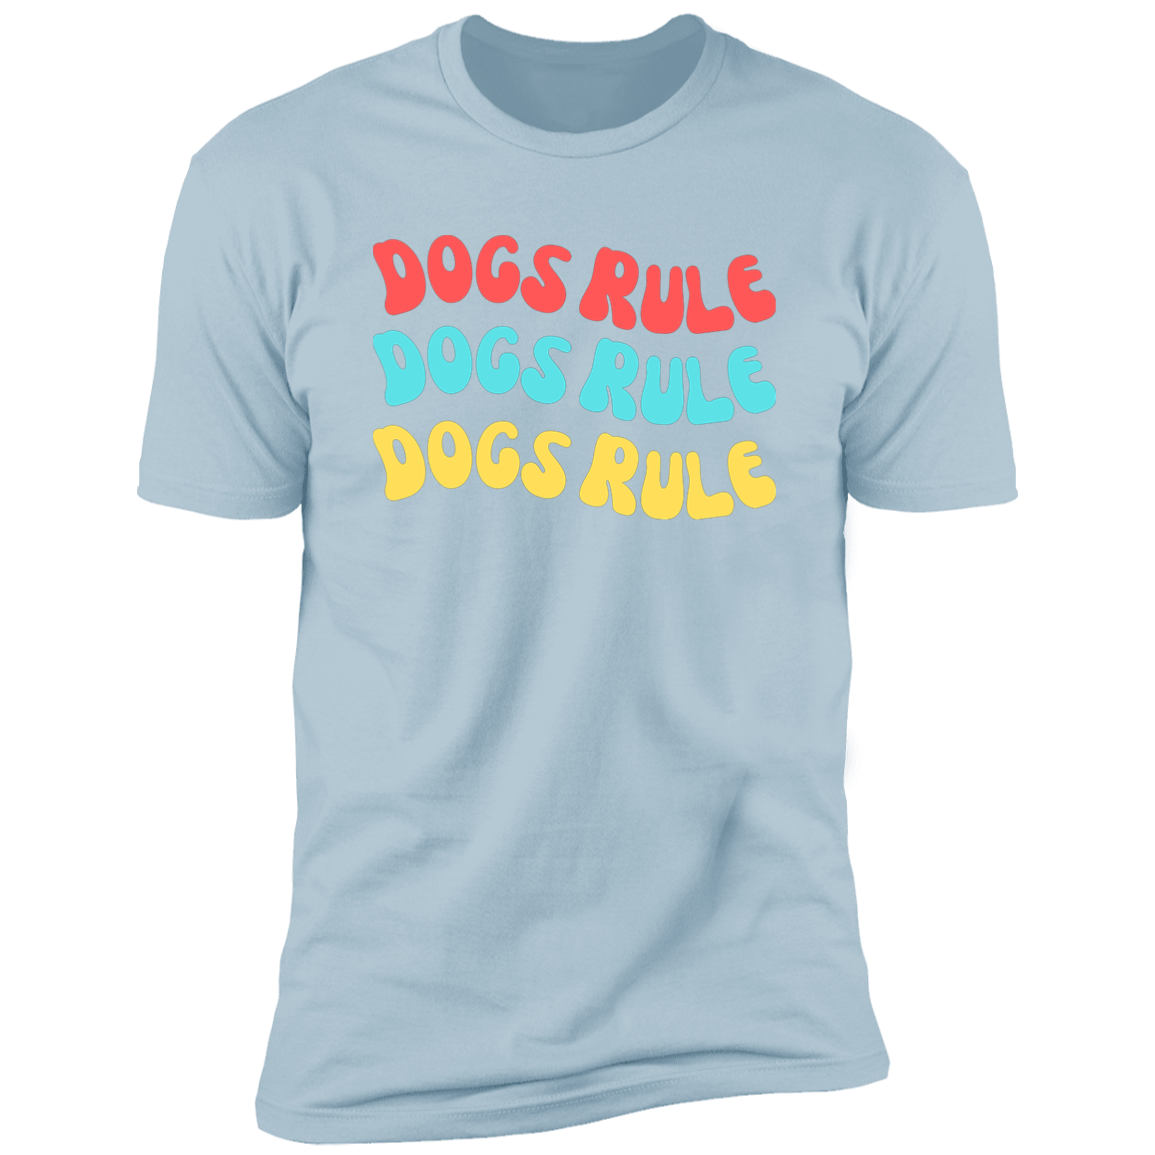 Dogs Rule Dog Shirt, dog shirt for humans, dog mom and dog dad shirt, in light blue